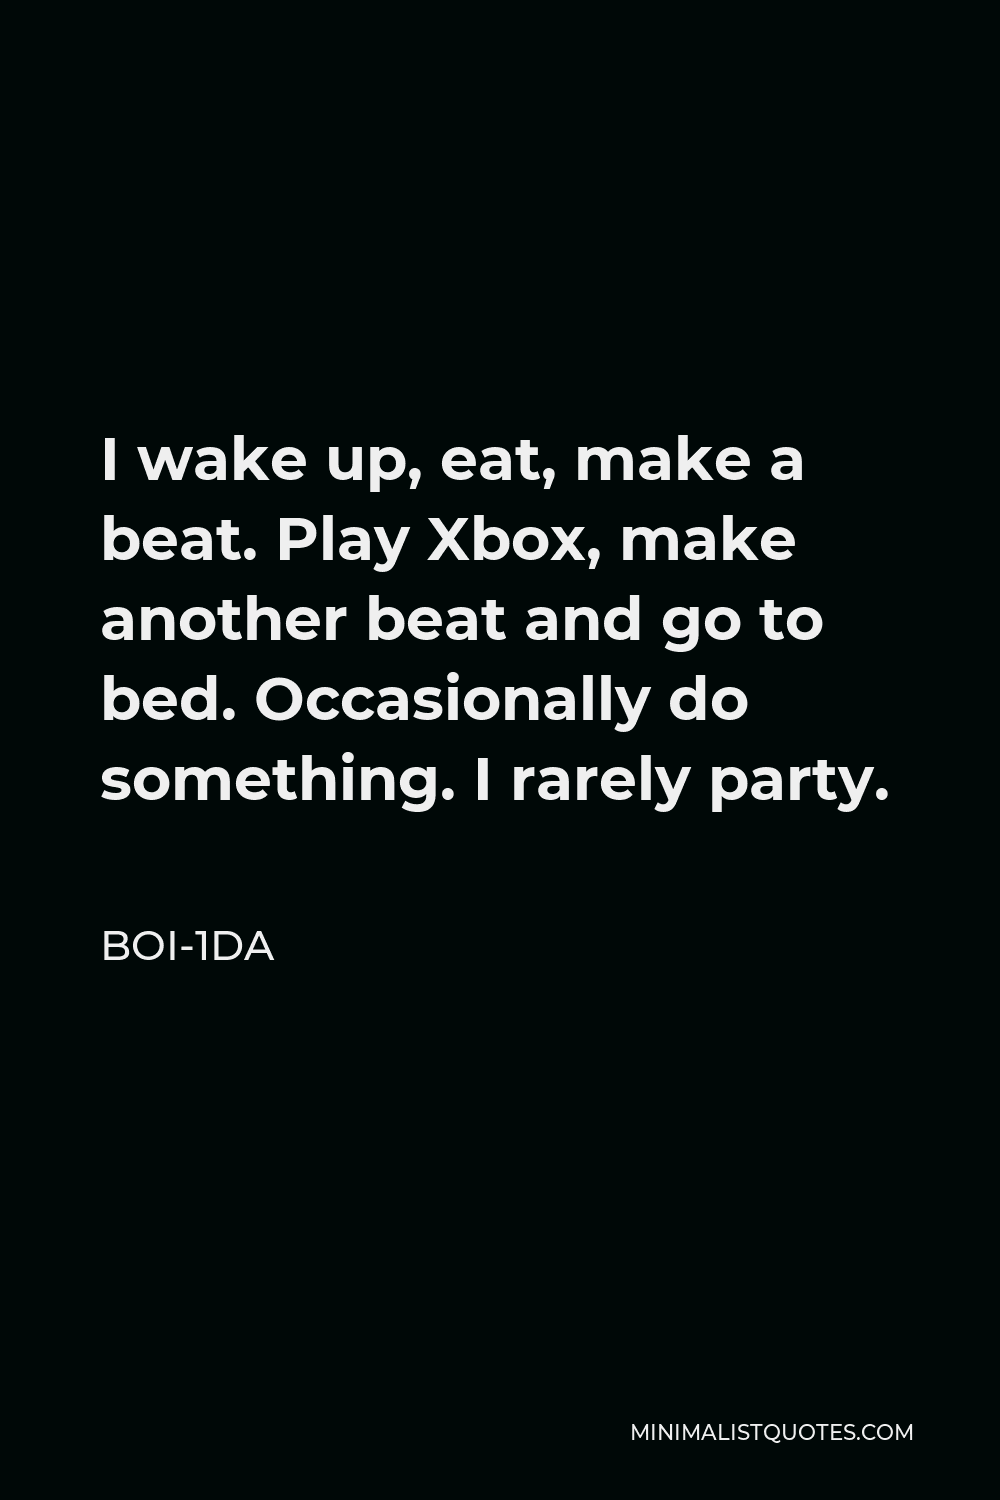 Boi-1da Quote - I wake up, eat, make a beat. Play Xbox, make another beat and go to bed. Occasionally do something. I rarely party.